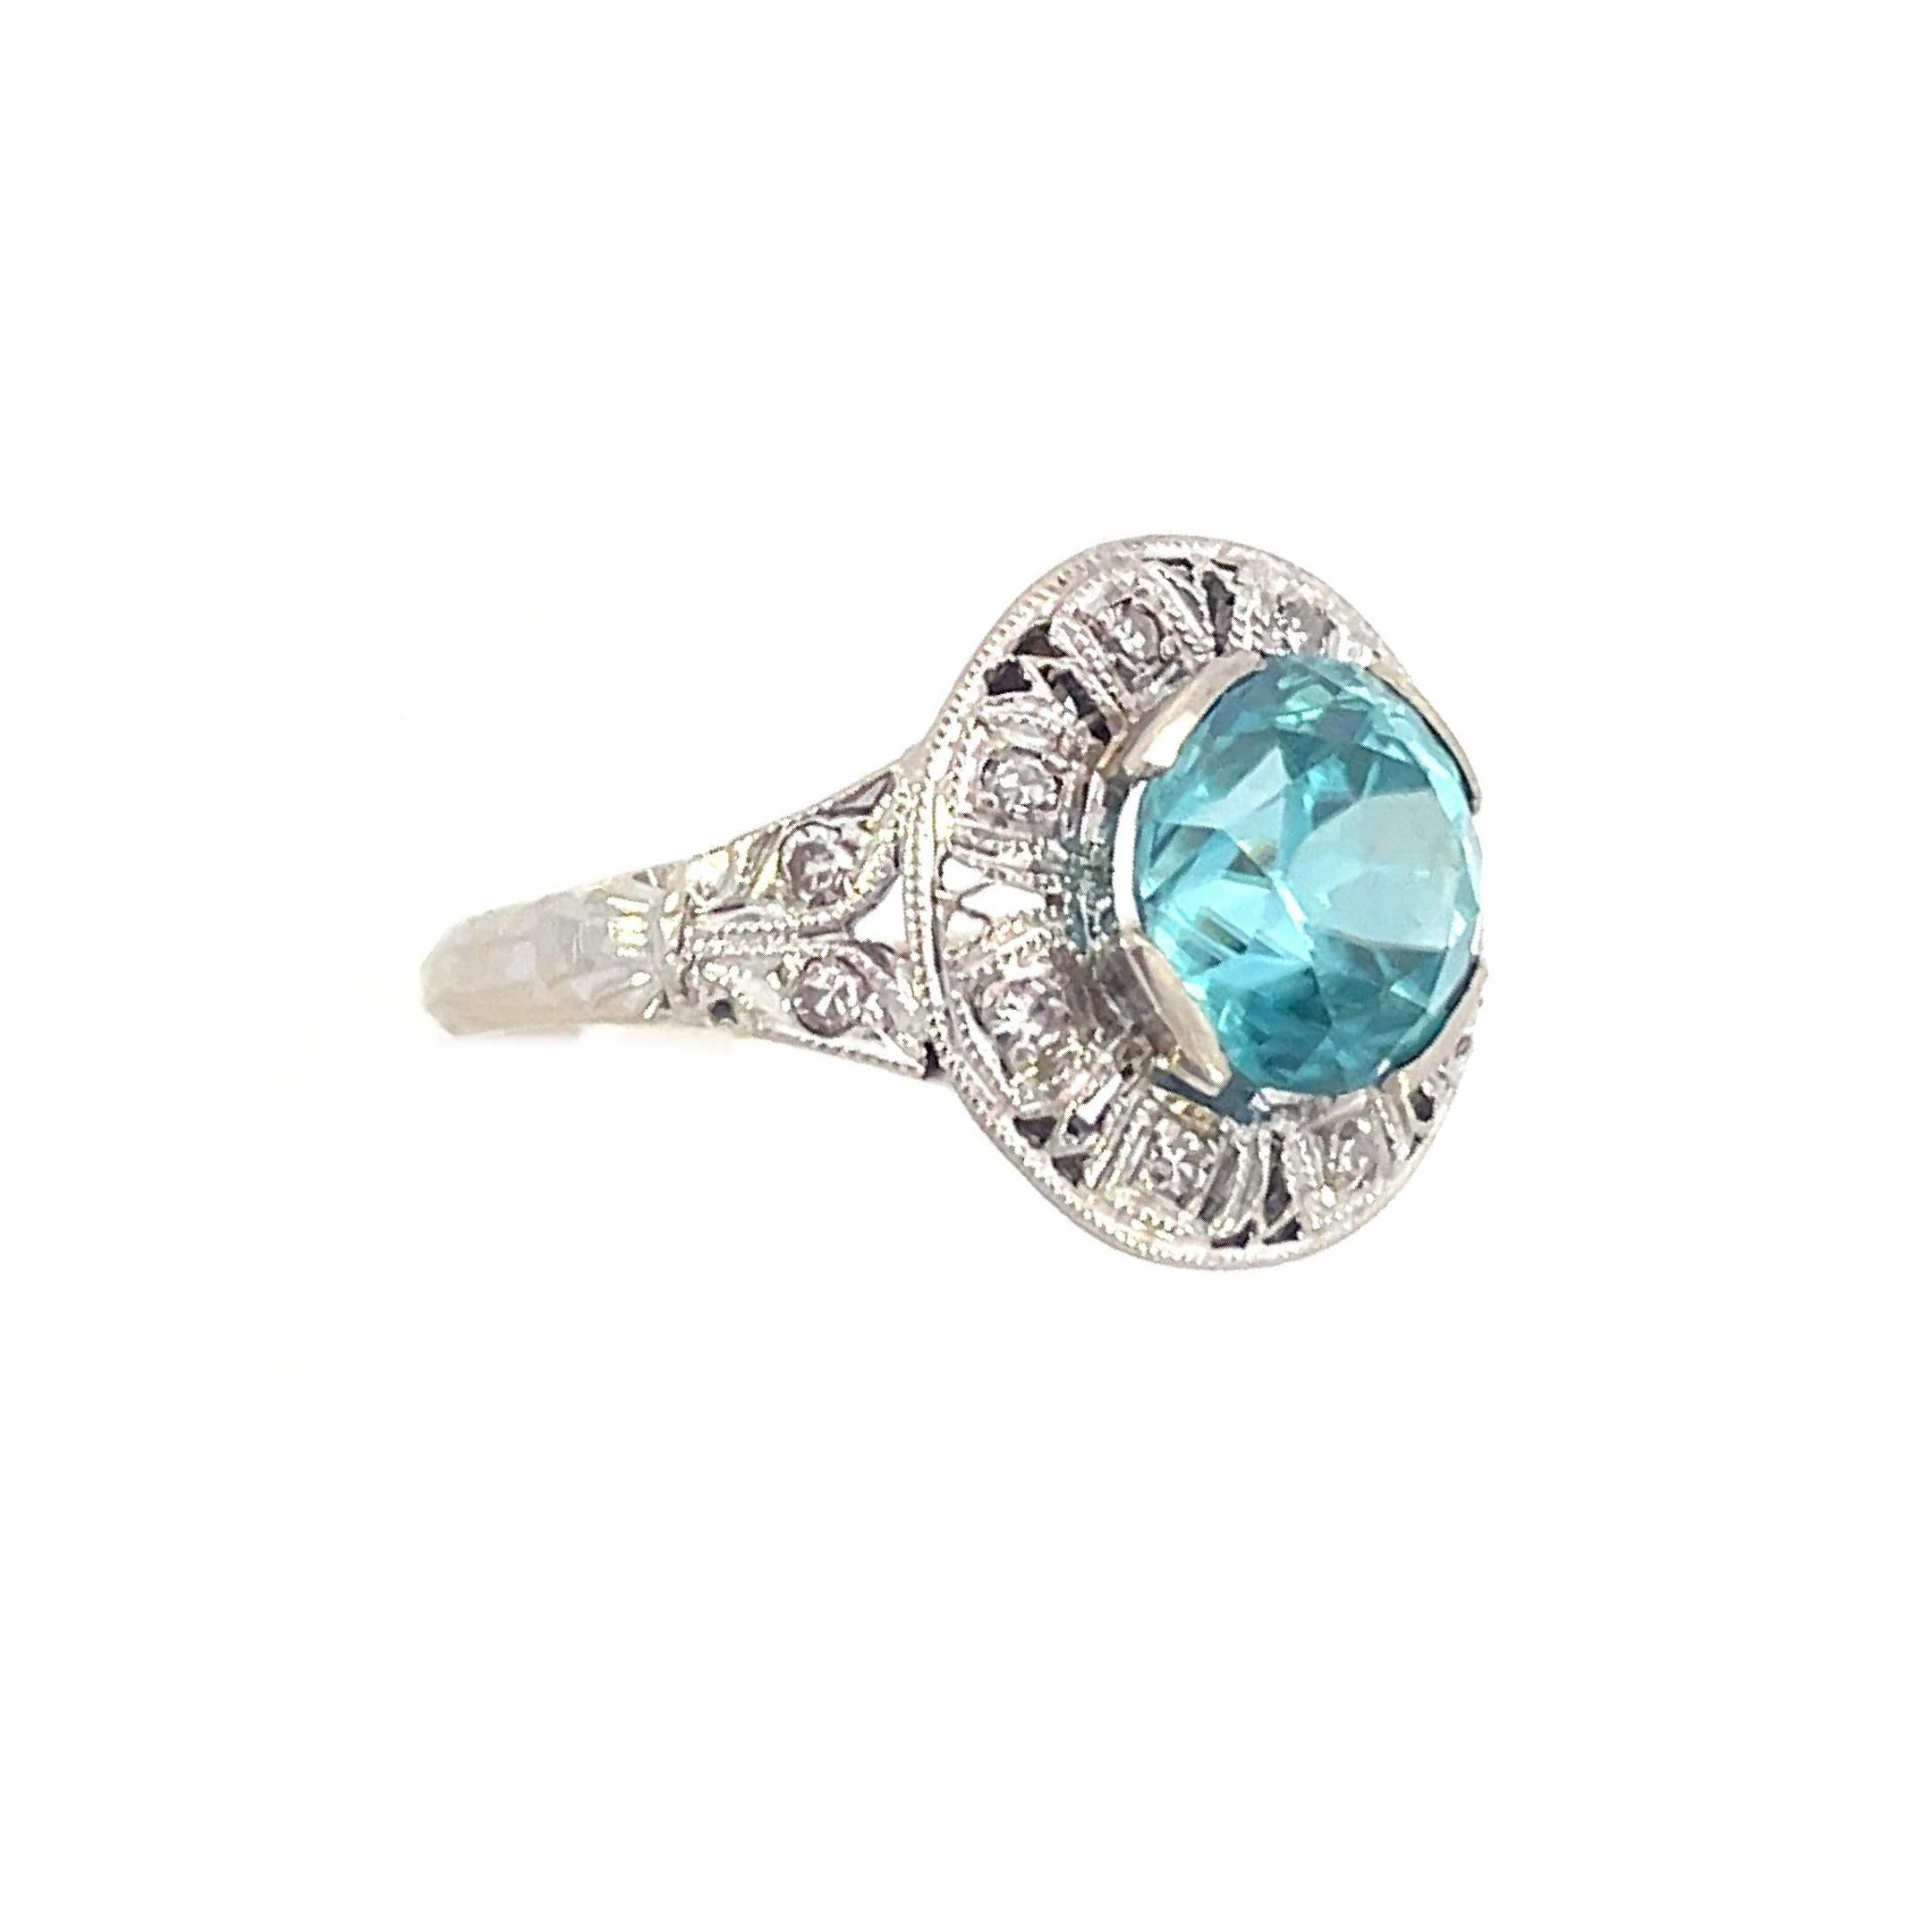 This is an alluring Art Deco ring crafted in 14K white gold showcasing a breathtaking 3-carat blue Zircon surrounded by sparkling diamonds. Looking into the 3.00-carat zircon in this eye-catching Art Deco ring is like gazing into a blue ocean that